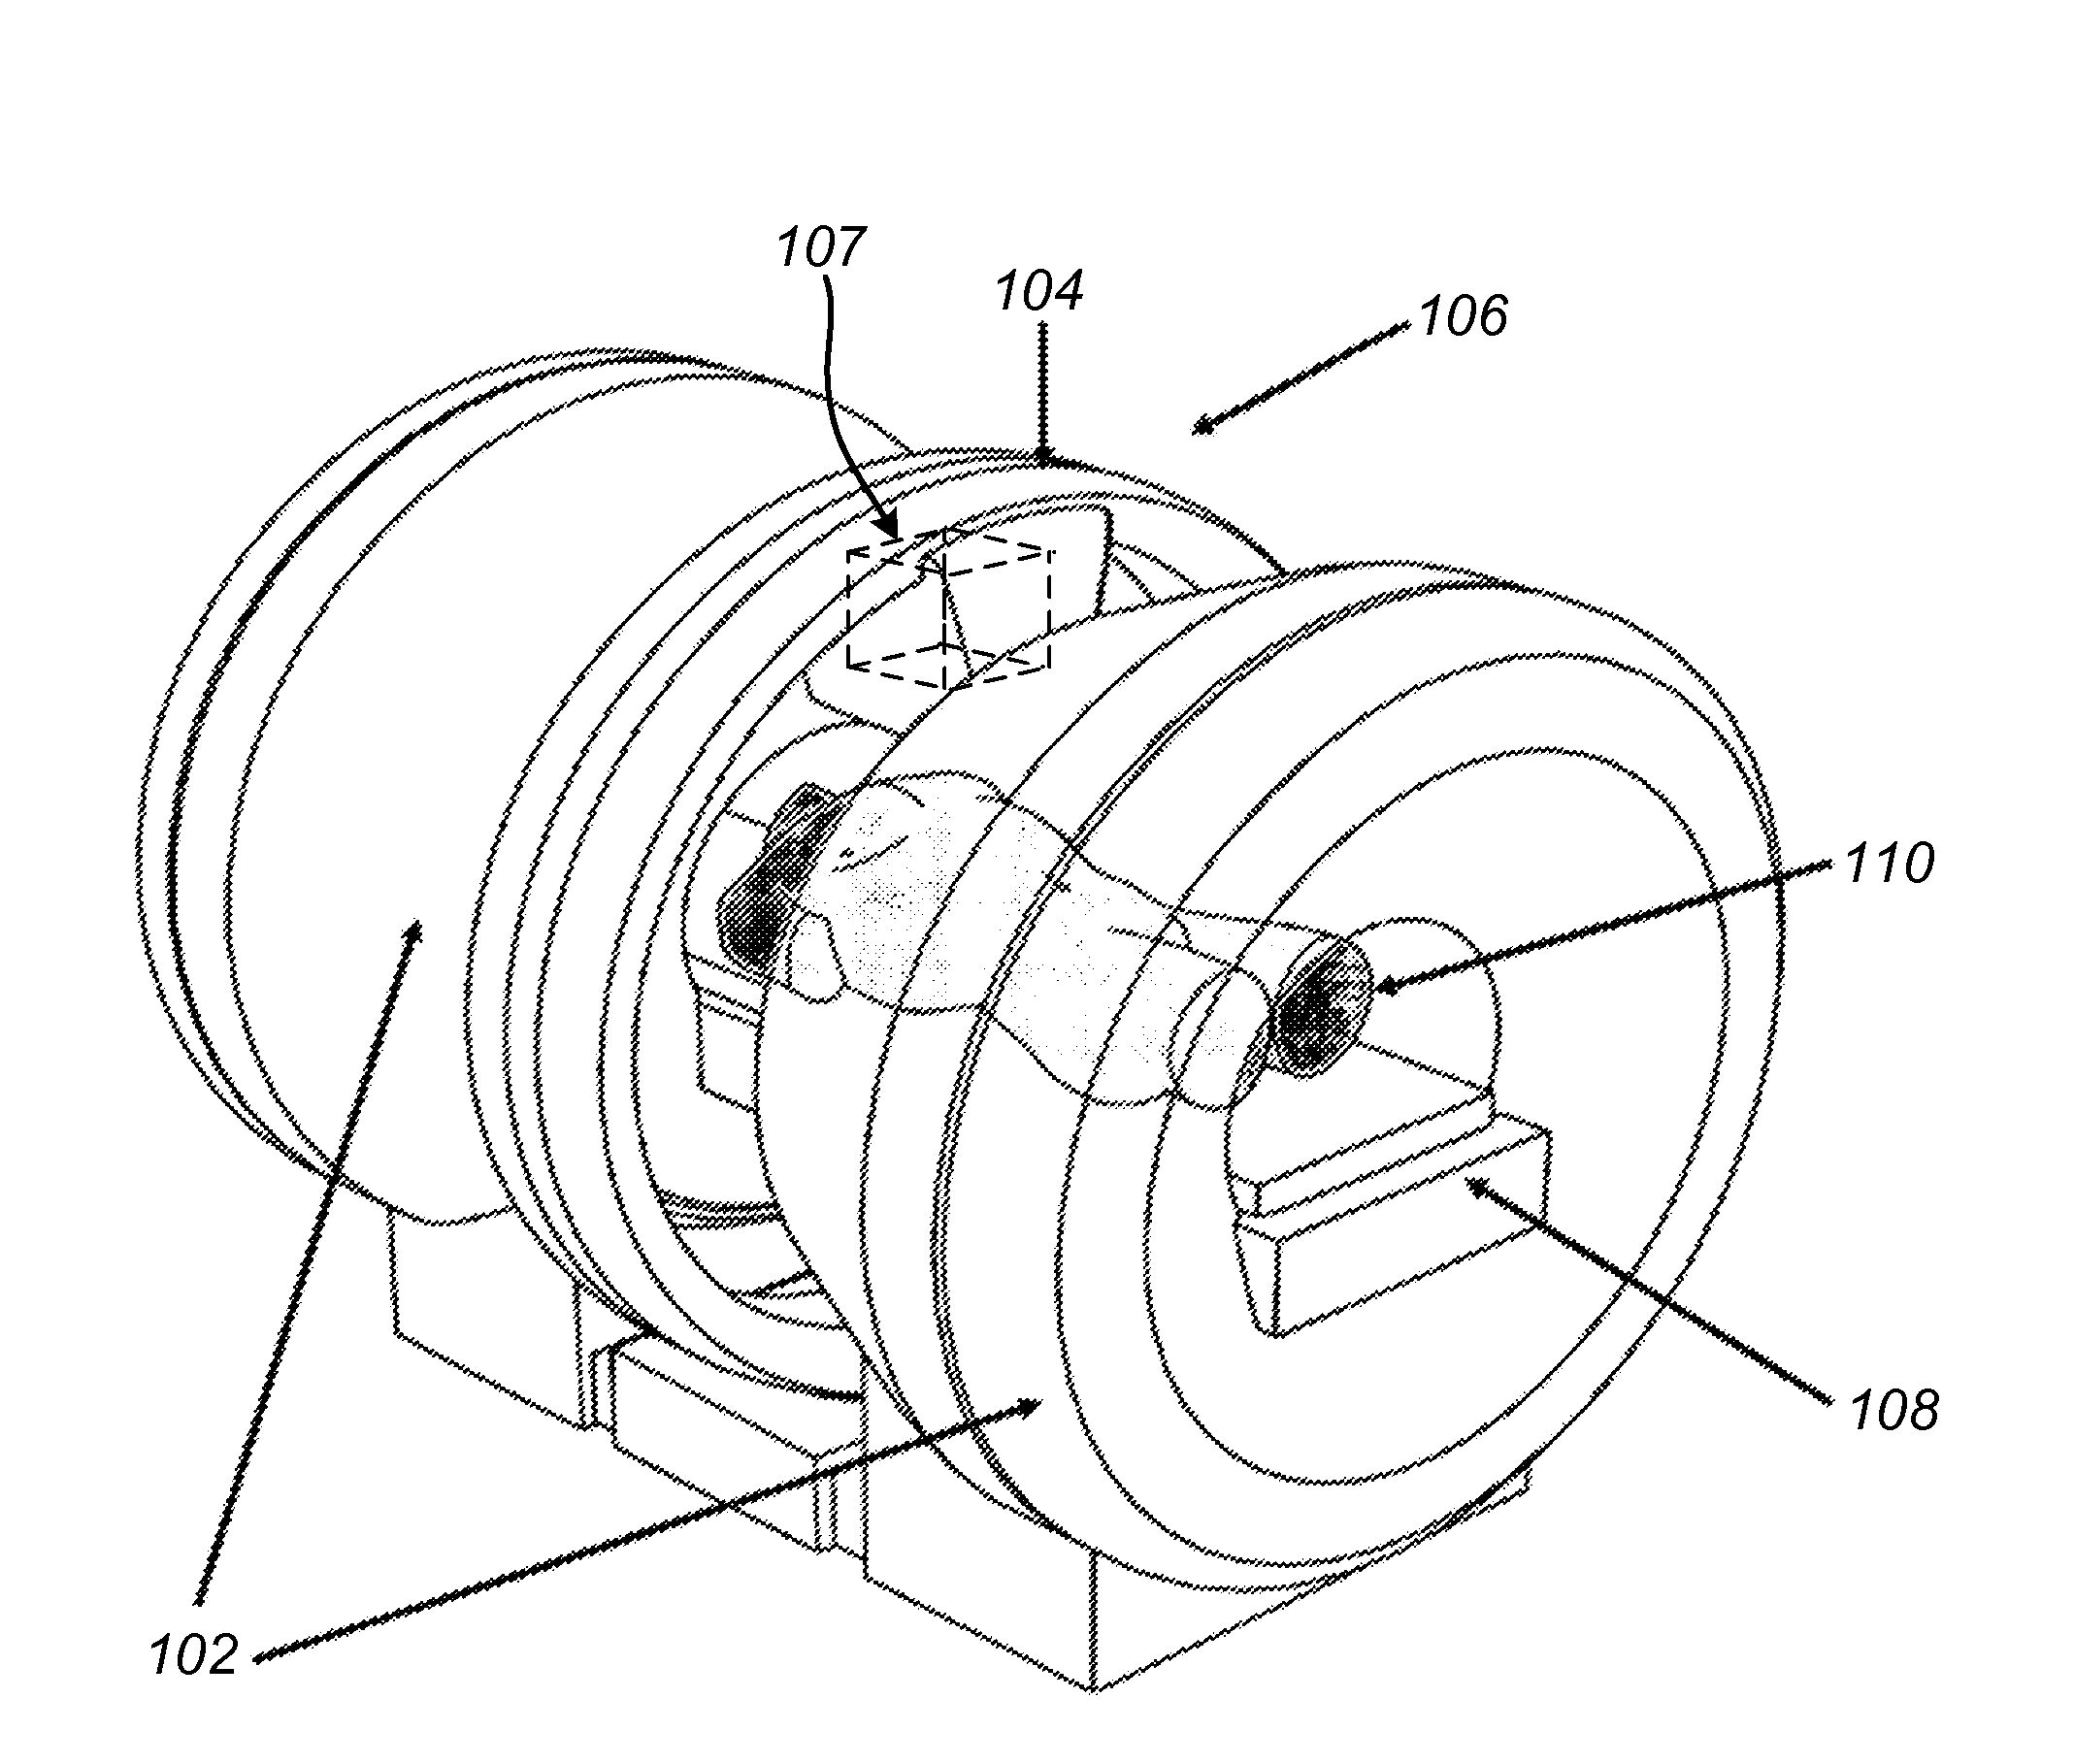 Method and apparatus for shielding a linear accelerator and a magnetic resonance imaging device from each other